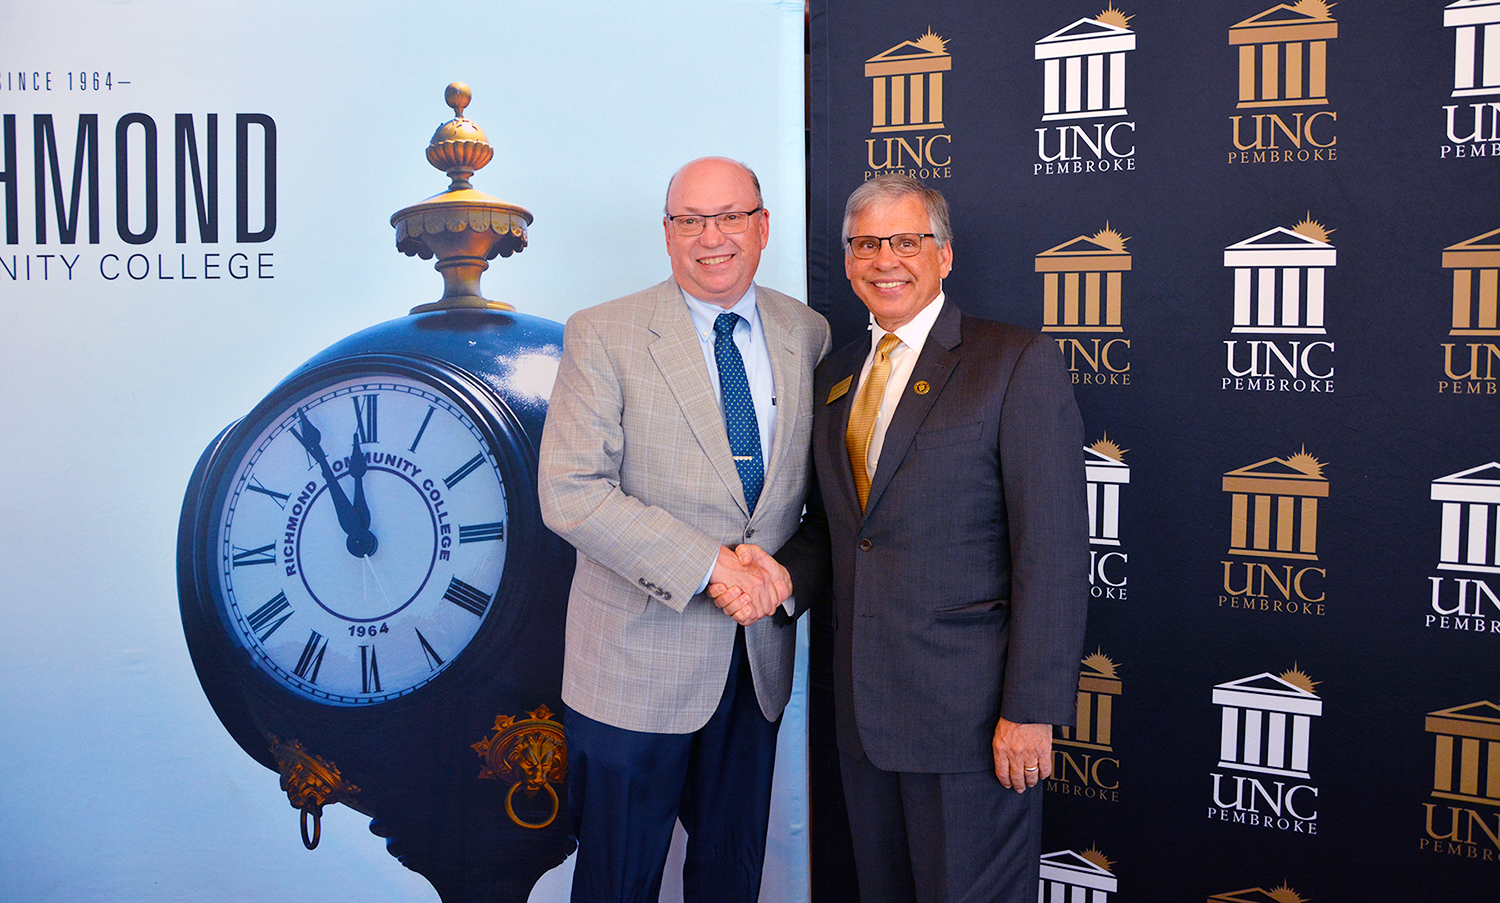 Dr. Dale McInnis, president of Richmond Community College, and Dr. Robin Cummings, chancellor of The University of North Carolina at Pembroke, shake hands 